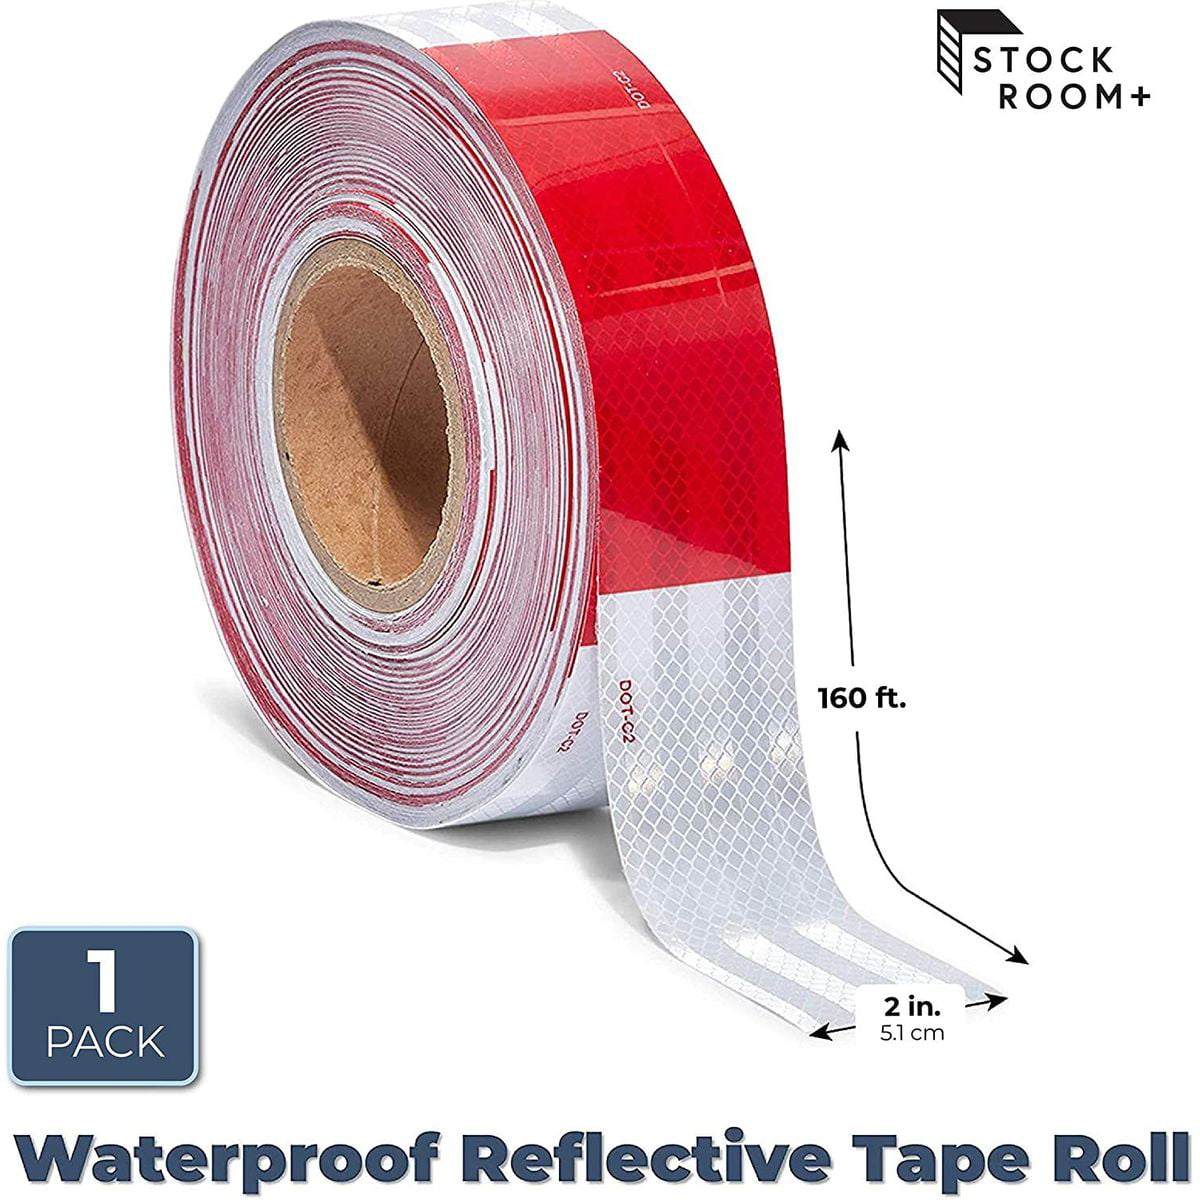 3M RED REFLECTIVE High Visibility Conspicuity Adhesive Roll Vinyl Tape Stickers